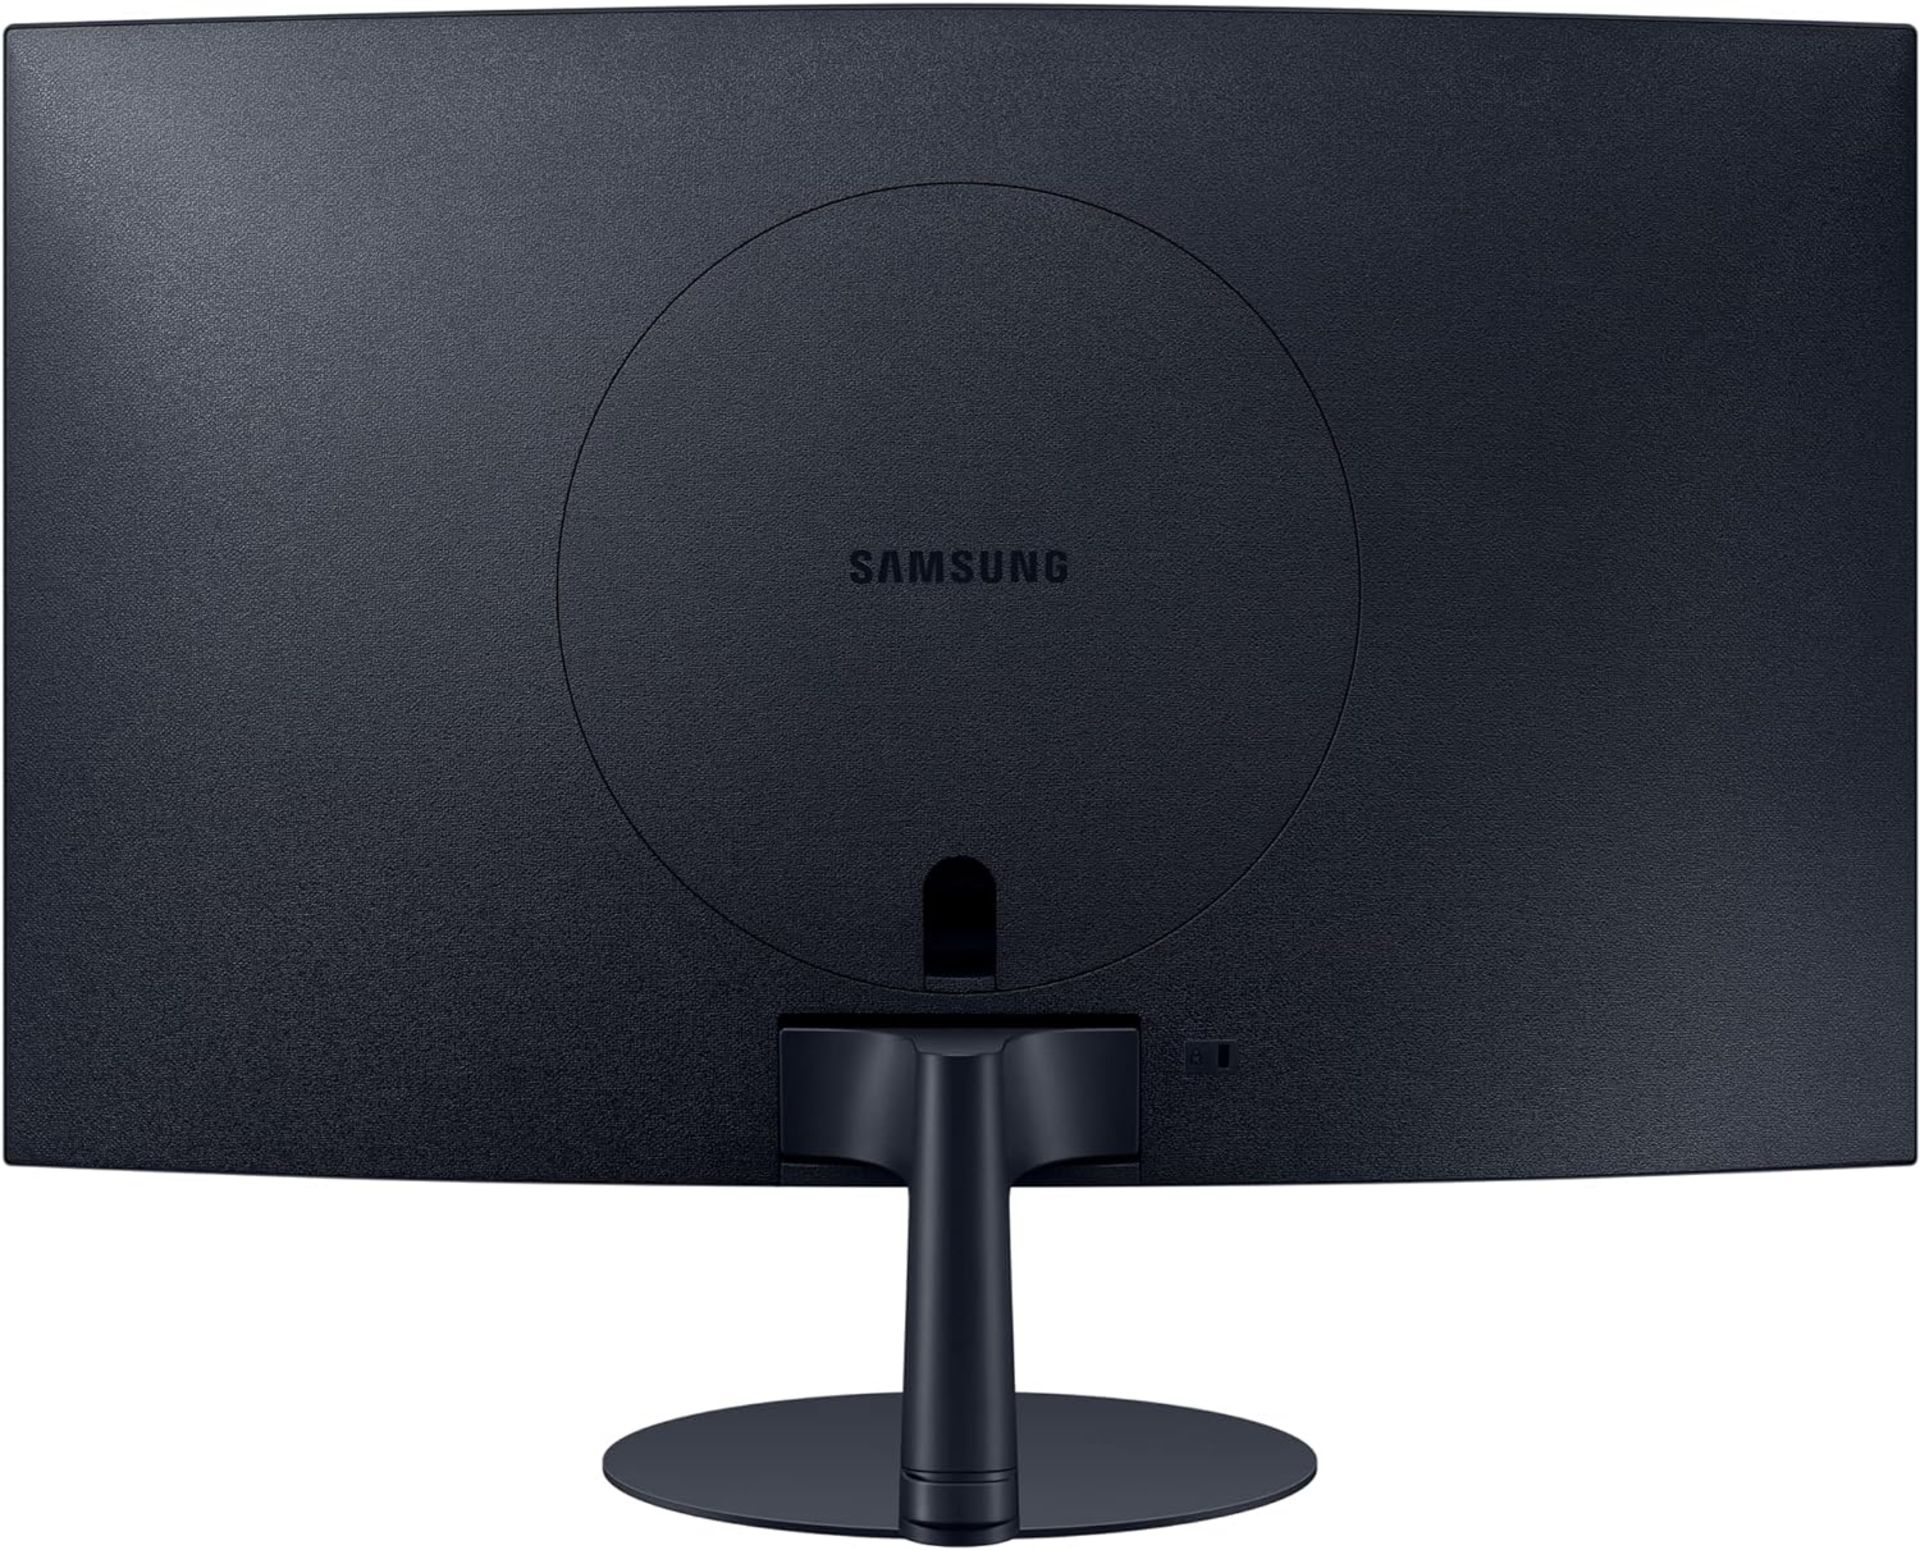 NEW & BOXED SAMSUNG S27C390EAU 27 Inch 75Hz Curved FHD Monitor. RRP £199. (R15). 27in LED display. - Image 3 of 8